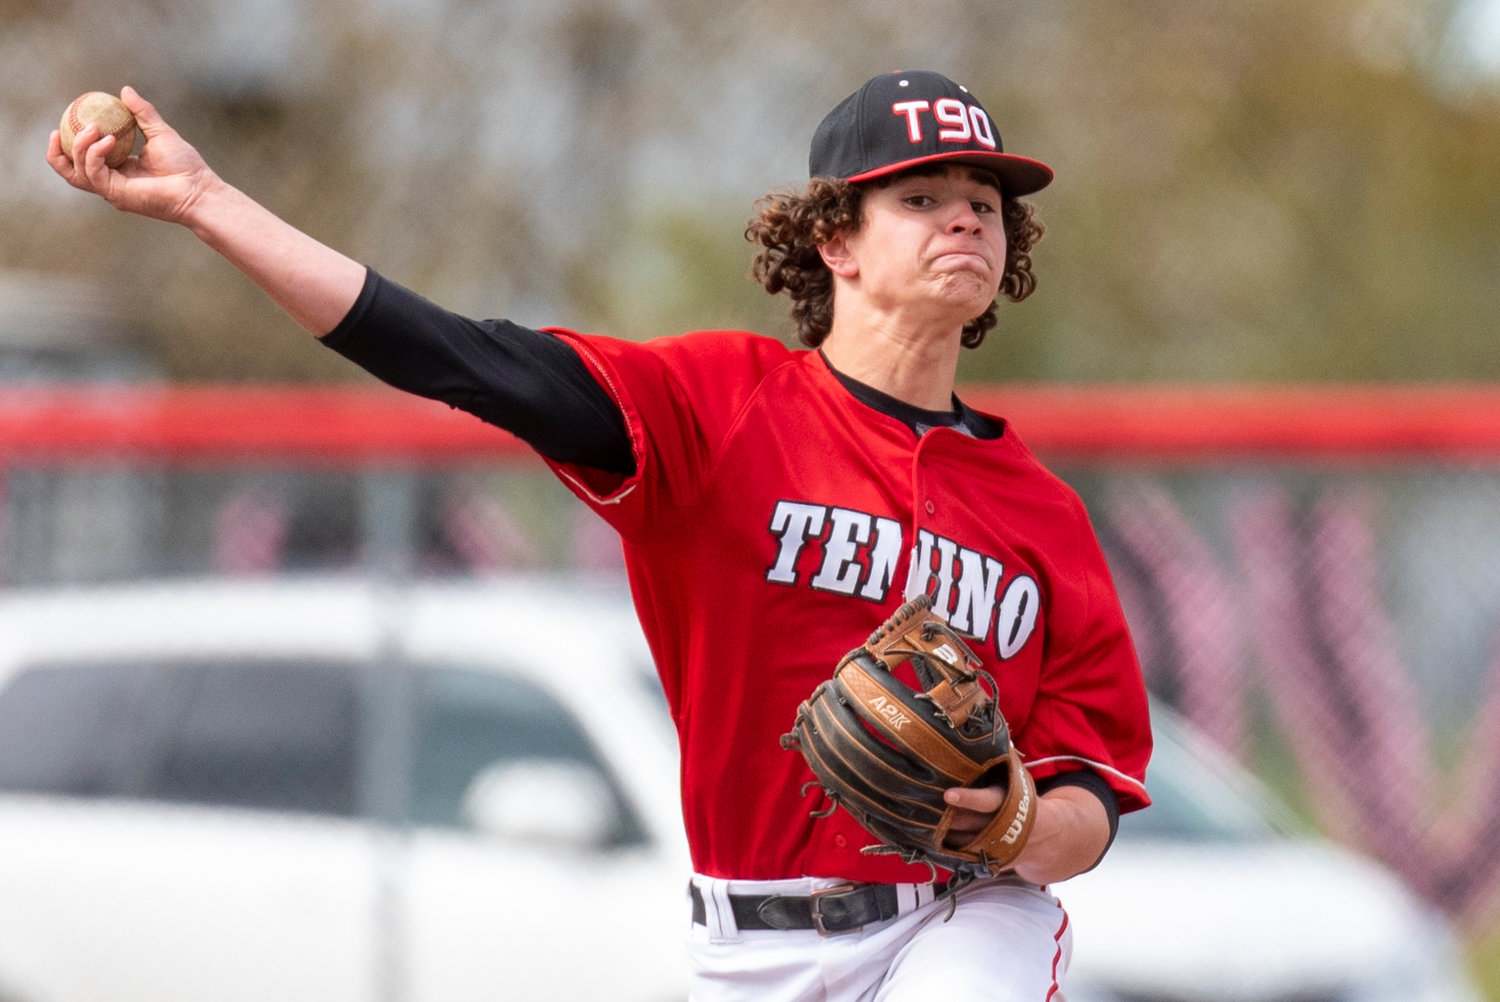 Tenino shortstop Eastin Snider makes a throw to first base during a home game against Elma on April 29.